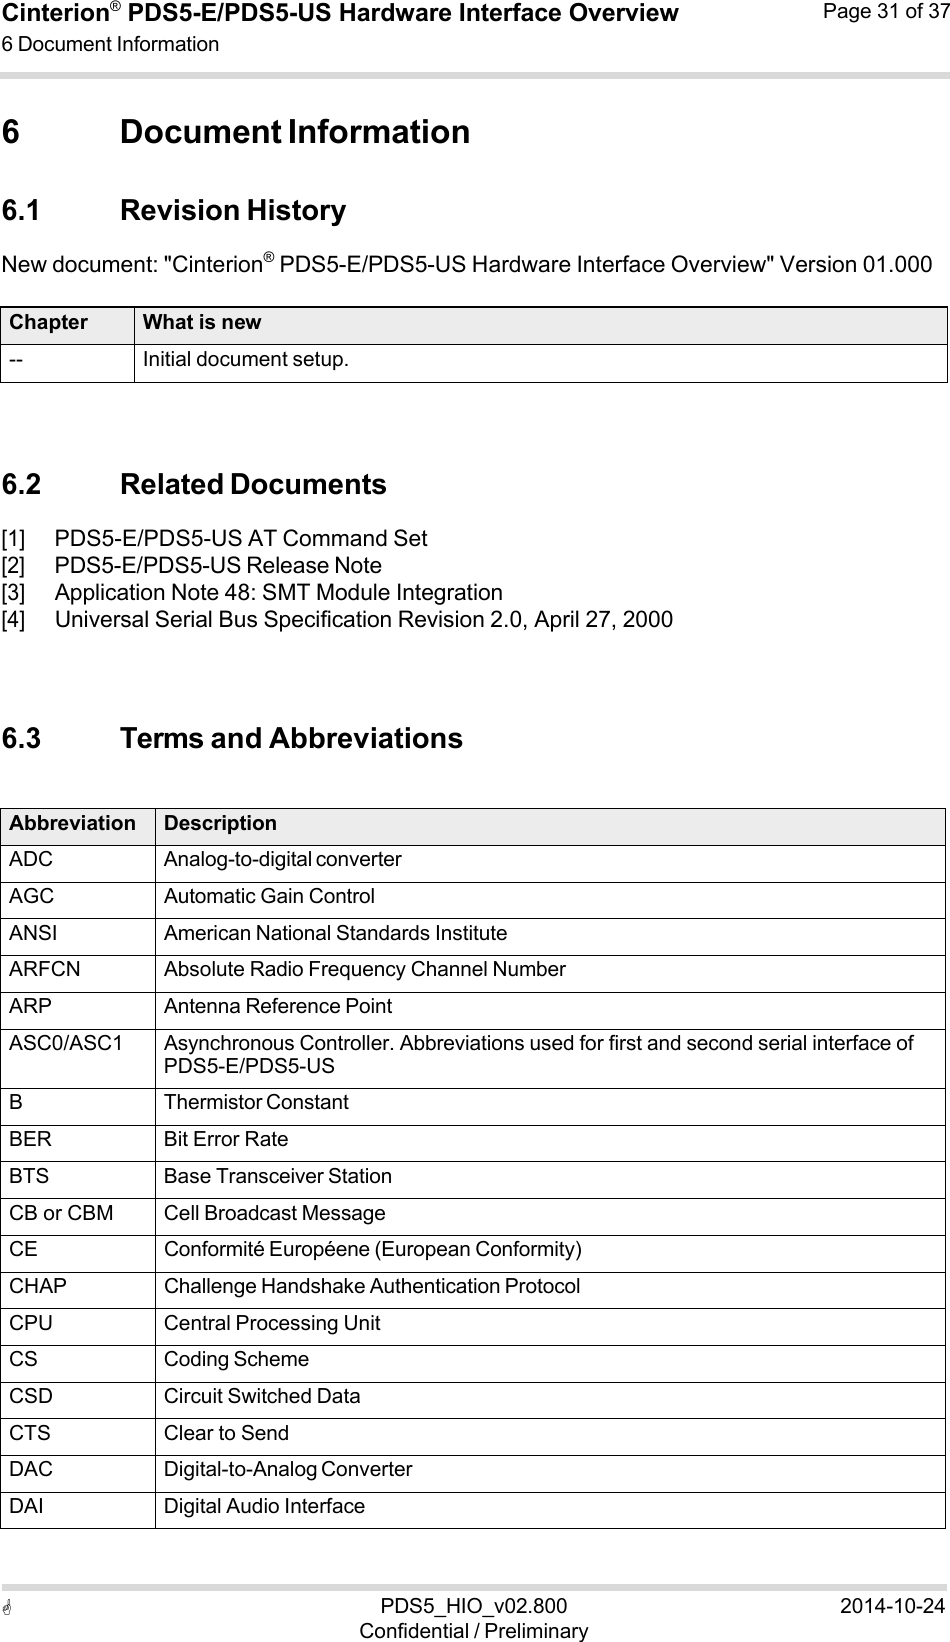  PDS5_HIO_v02.800Confidential / Preliminary2014-10-24Cinterion®  PDS5-E/PDS5-US Hardware Interface Overview6 Document Information Page 31 of 37   6 Document Information  6.1 Revision History New document: &quot;Cinterion® PDS5-E/PDS5-US Hardware Interface Overview&quot; Version 01.000  Chapter What is new -- Initial document setup.    6.2 Related Documents [1] PDS5-E/PDS5-US AT Command Set [2] PDS5-E/PDS5-US Release Note [3] Application Note 48: SMT Module Integration [4] Universal Serial Bus Specification Revision 2.0, April 27, 2000    6.3 Terms and Abbreviations   Abbreviation Description ADC Analog-to-digital converterAGC Automatic Gain ControlANSI American National Standards InstituteARFCN Absolute Radio Frequency Channel NumberARP Antenna Reference PointASC0/ASC1 Asynchronous Controller. Abbreviations used for first and second serial interface of PDS5-E/PDS5-US B Thermistor Constant BER Bit Error Rate BTS Base Transceiver StationCB or CBM Cell Broadcast MessageCE Conformité Européene (European Conformity)CHAP Challenge Handshake Authentication ProtocolCPU Central Processing UnitCS Coding Scheme CSD Circuit Switched Data CTS Clear to Send DAC Digital-to-Analog ConverterDAI Digital Audio Interface 